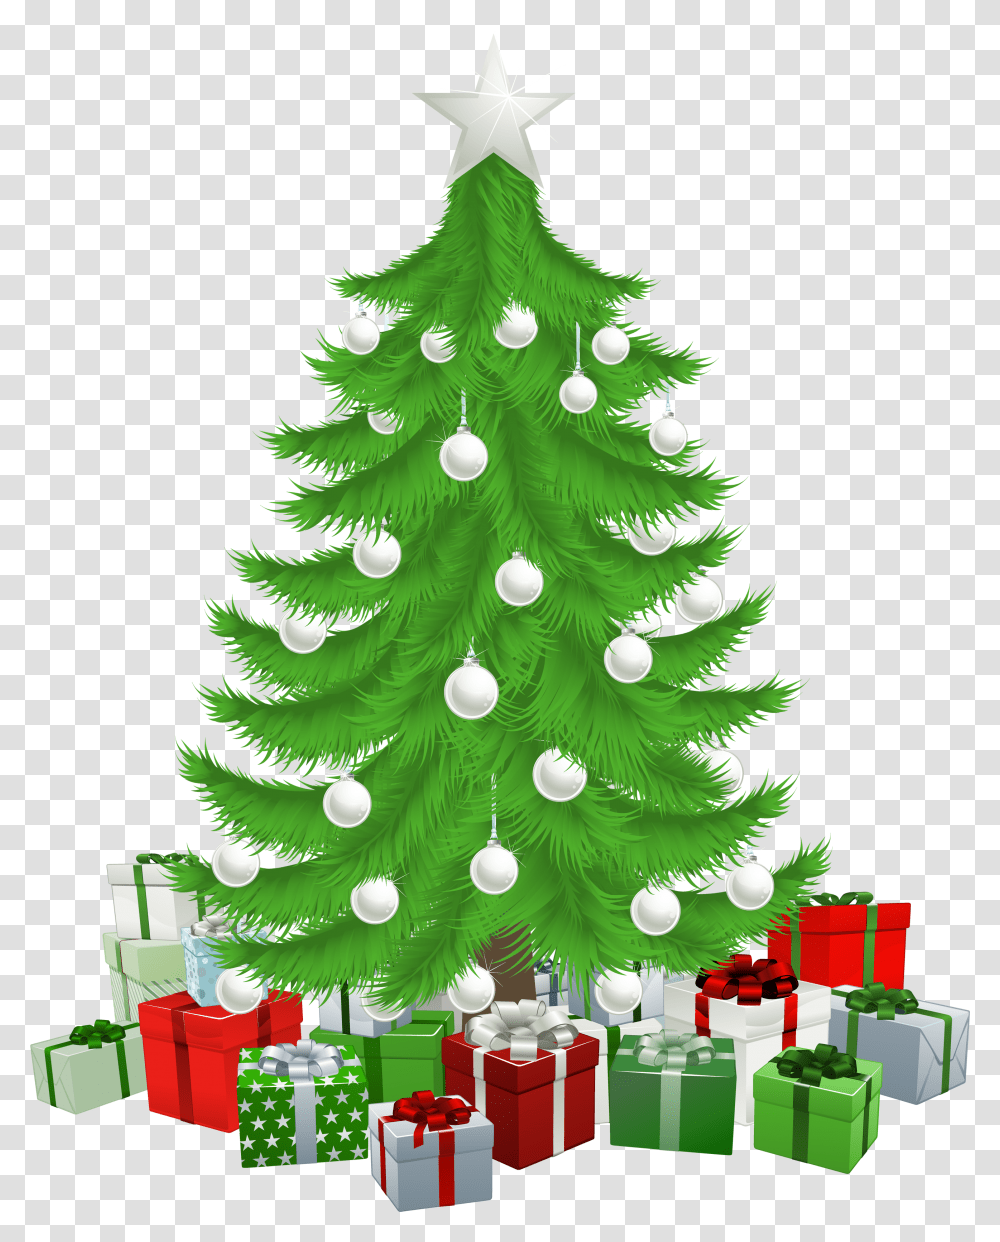 Christmas And Vectors For Free Download Dlpngcom Background Christmas Tree Presents Clipart, Ornament, Plant, Star Symbol Transparent Png